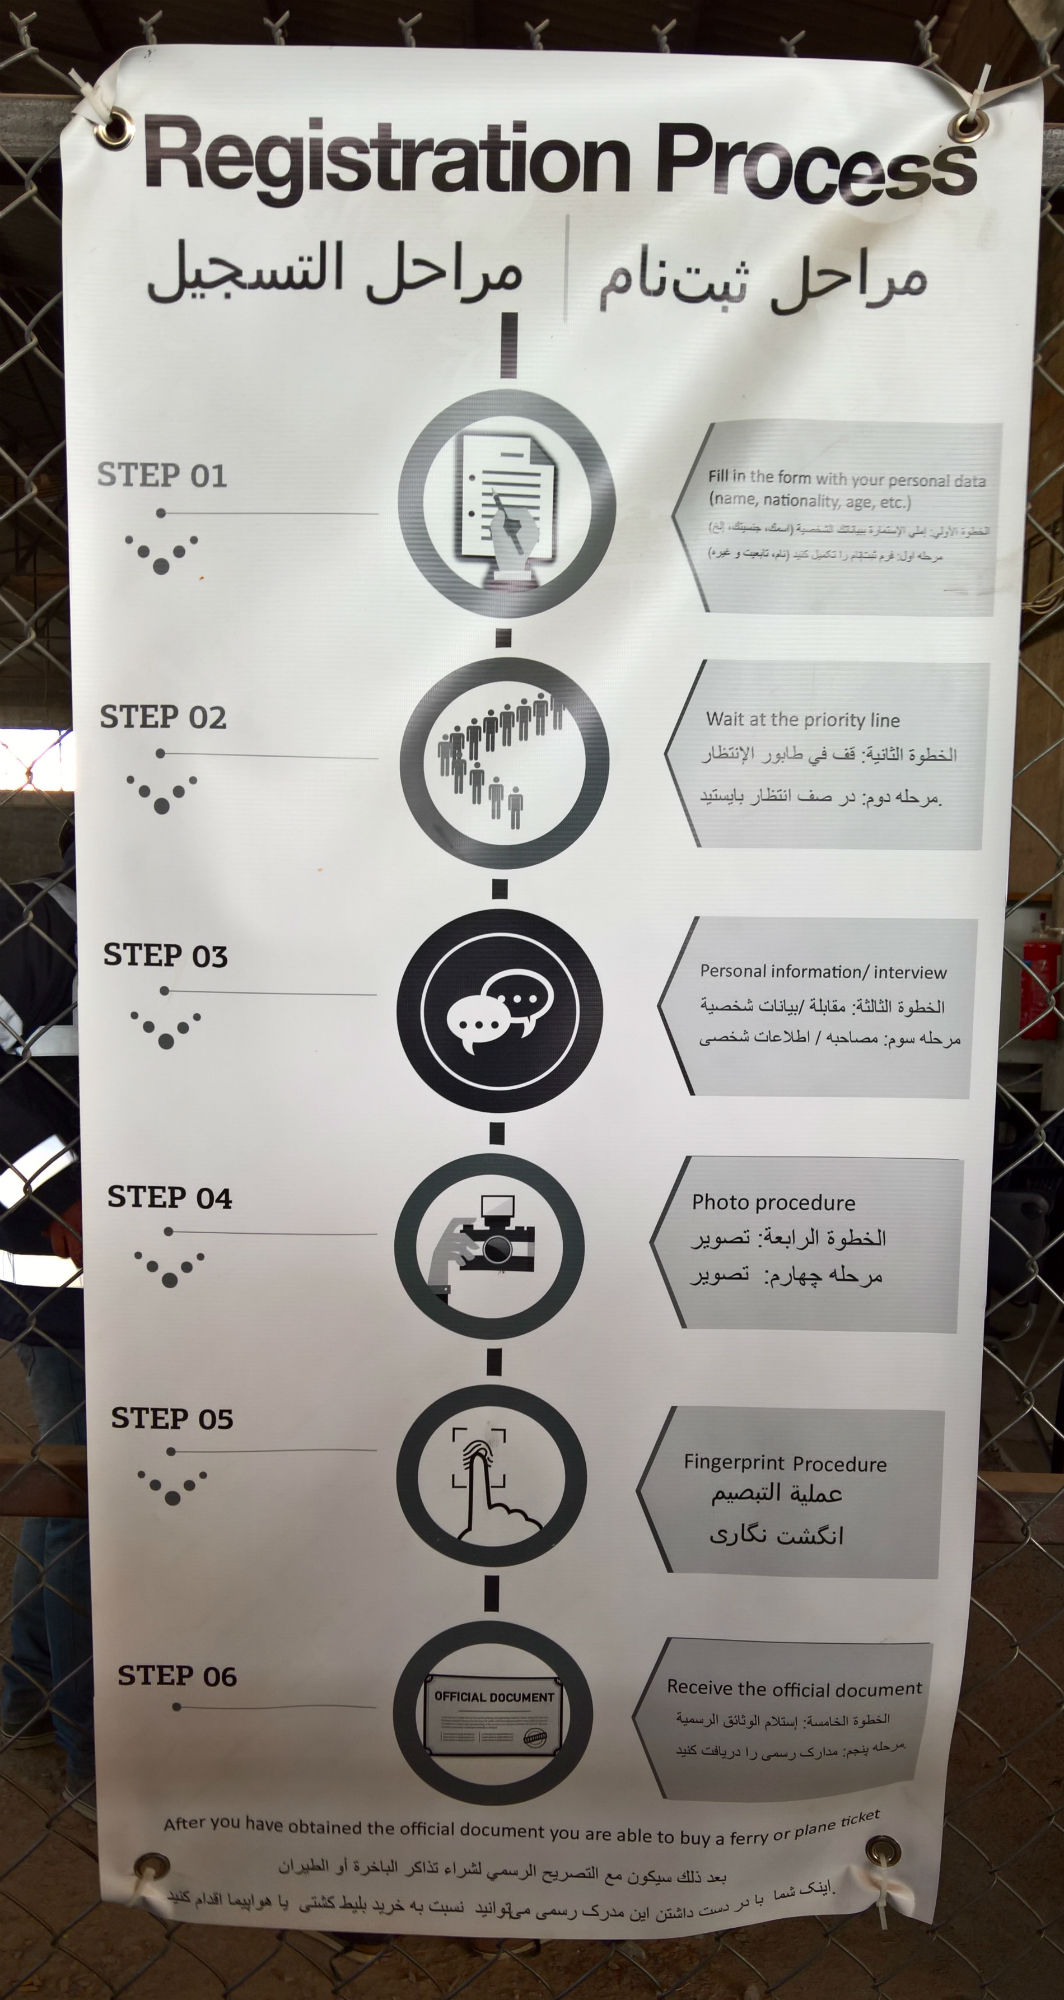 Signs, including images as well as text, help refugees navigate the complex registration process 
